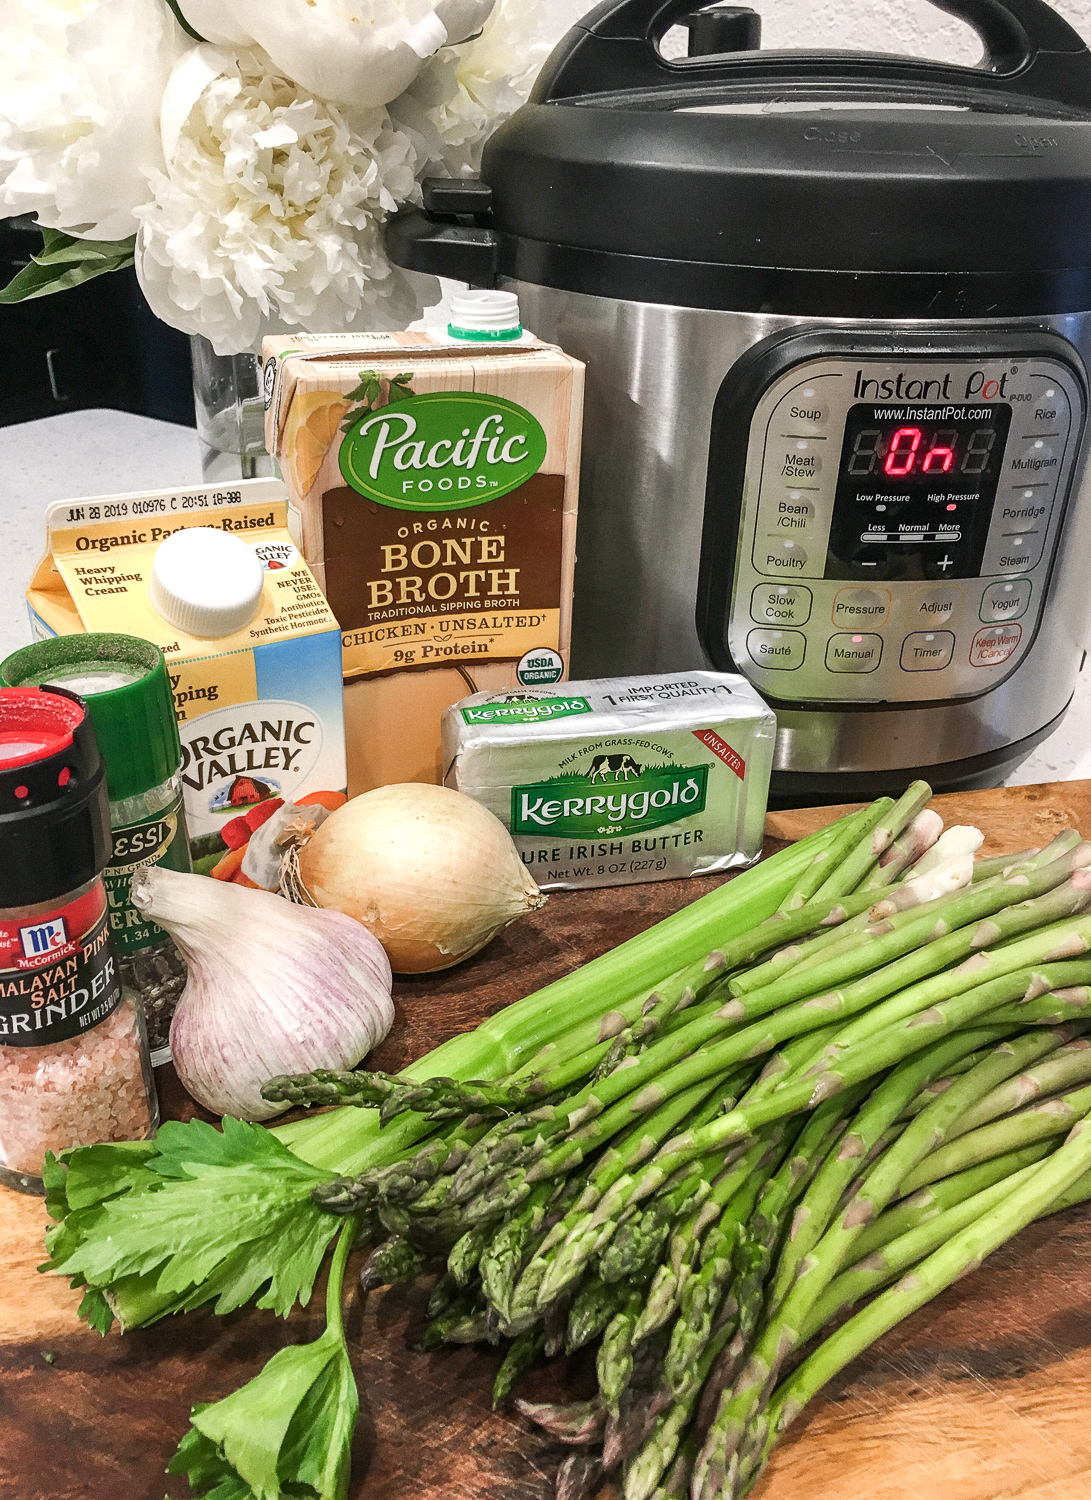 Looking for an instant pot soup recipe? The best asparagus soup you'll ever have is made in the pressure cooker! It's creamy and flavorful.